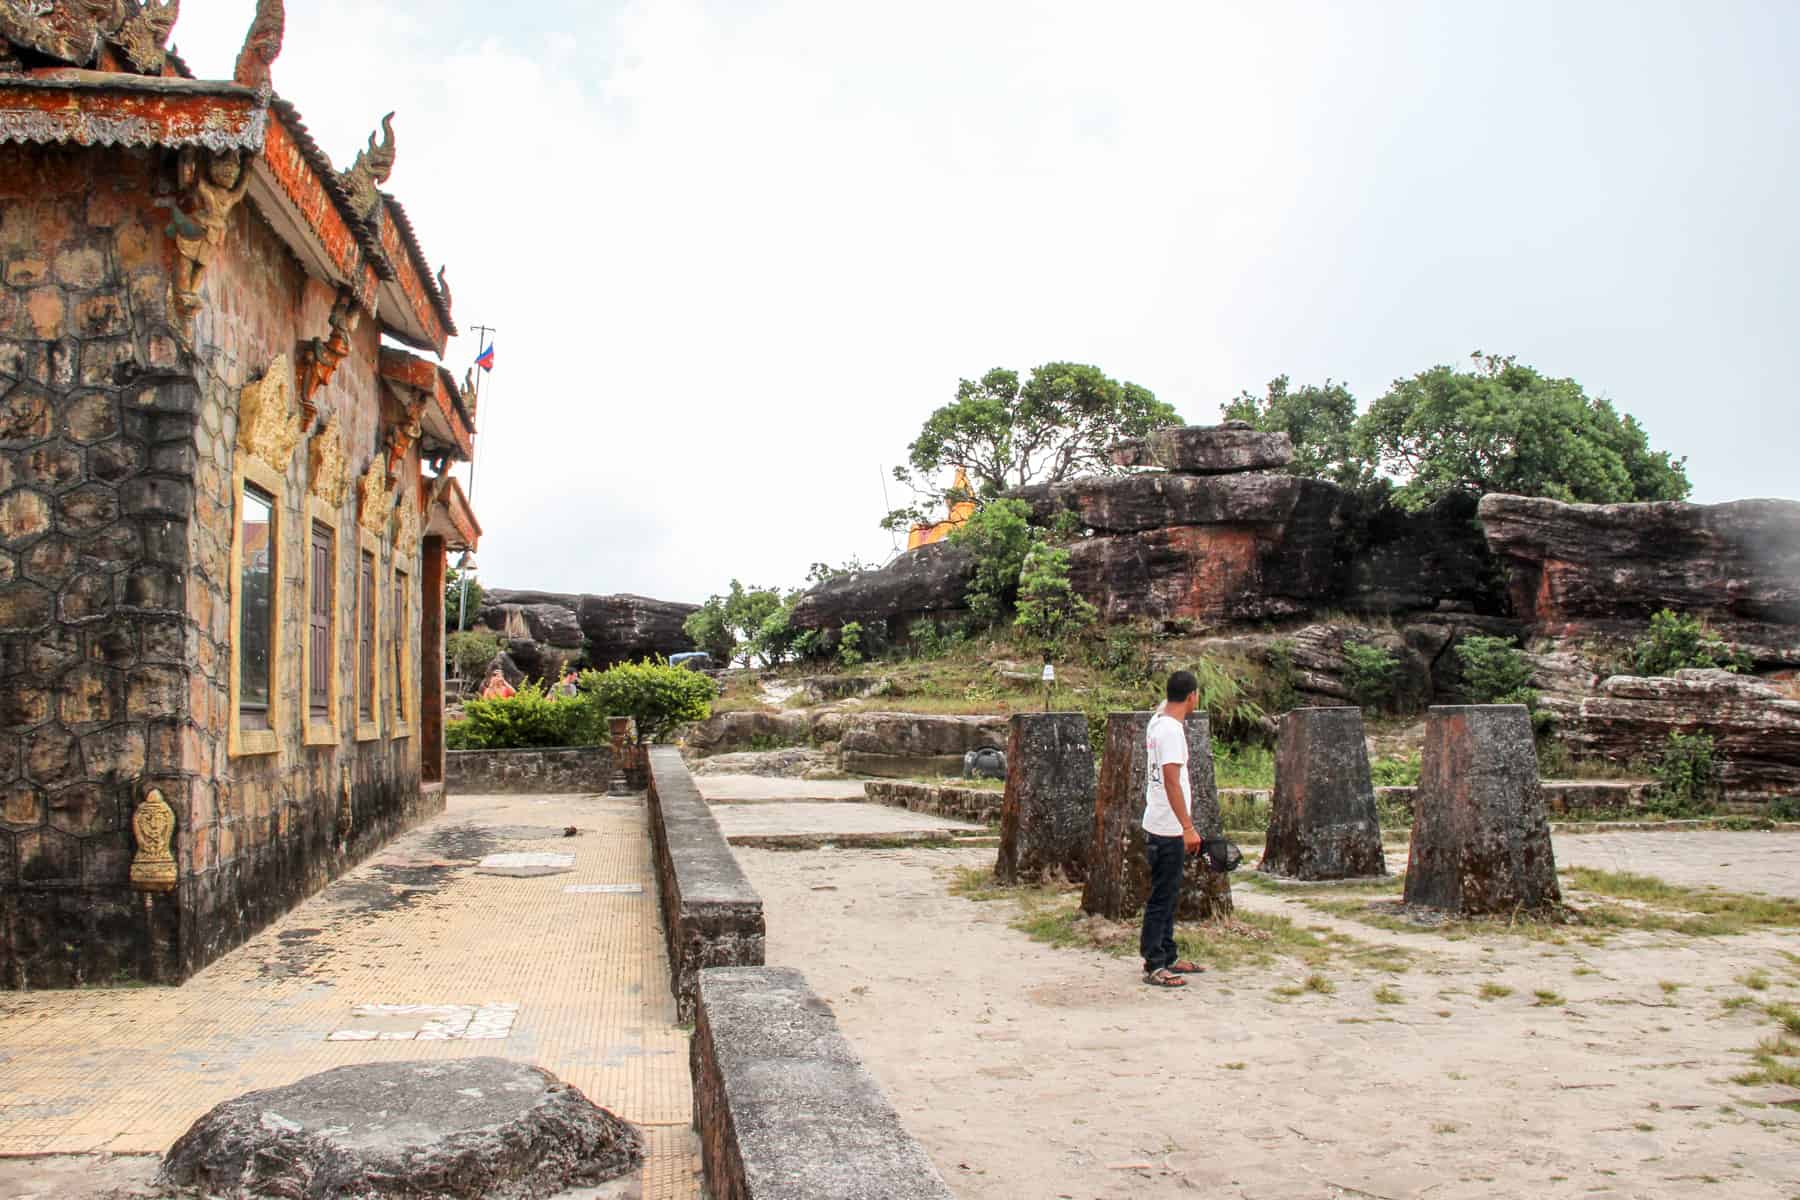 A man in a white t-shirt walks amongst giant black-red stones in front of a run-down, empty stone temple building with yellow and orange trim. 